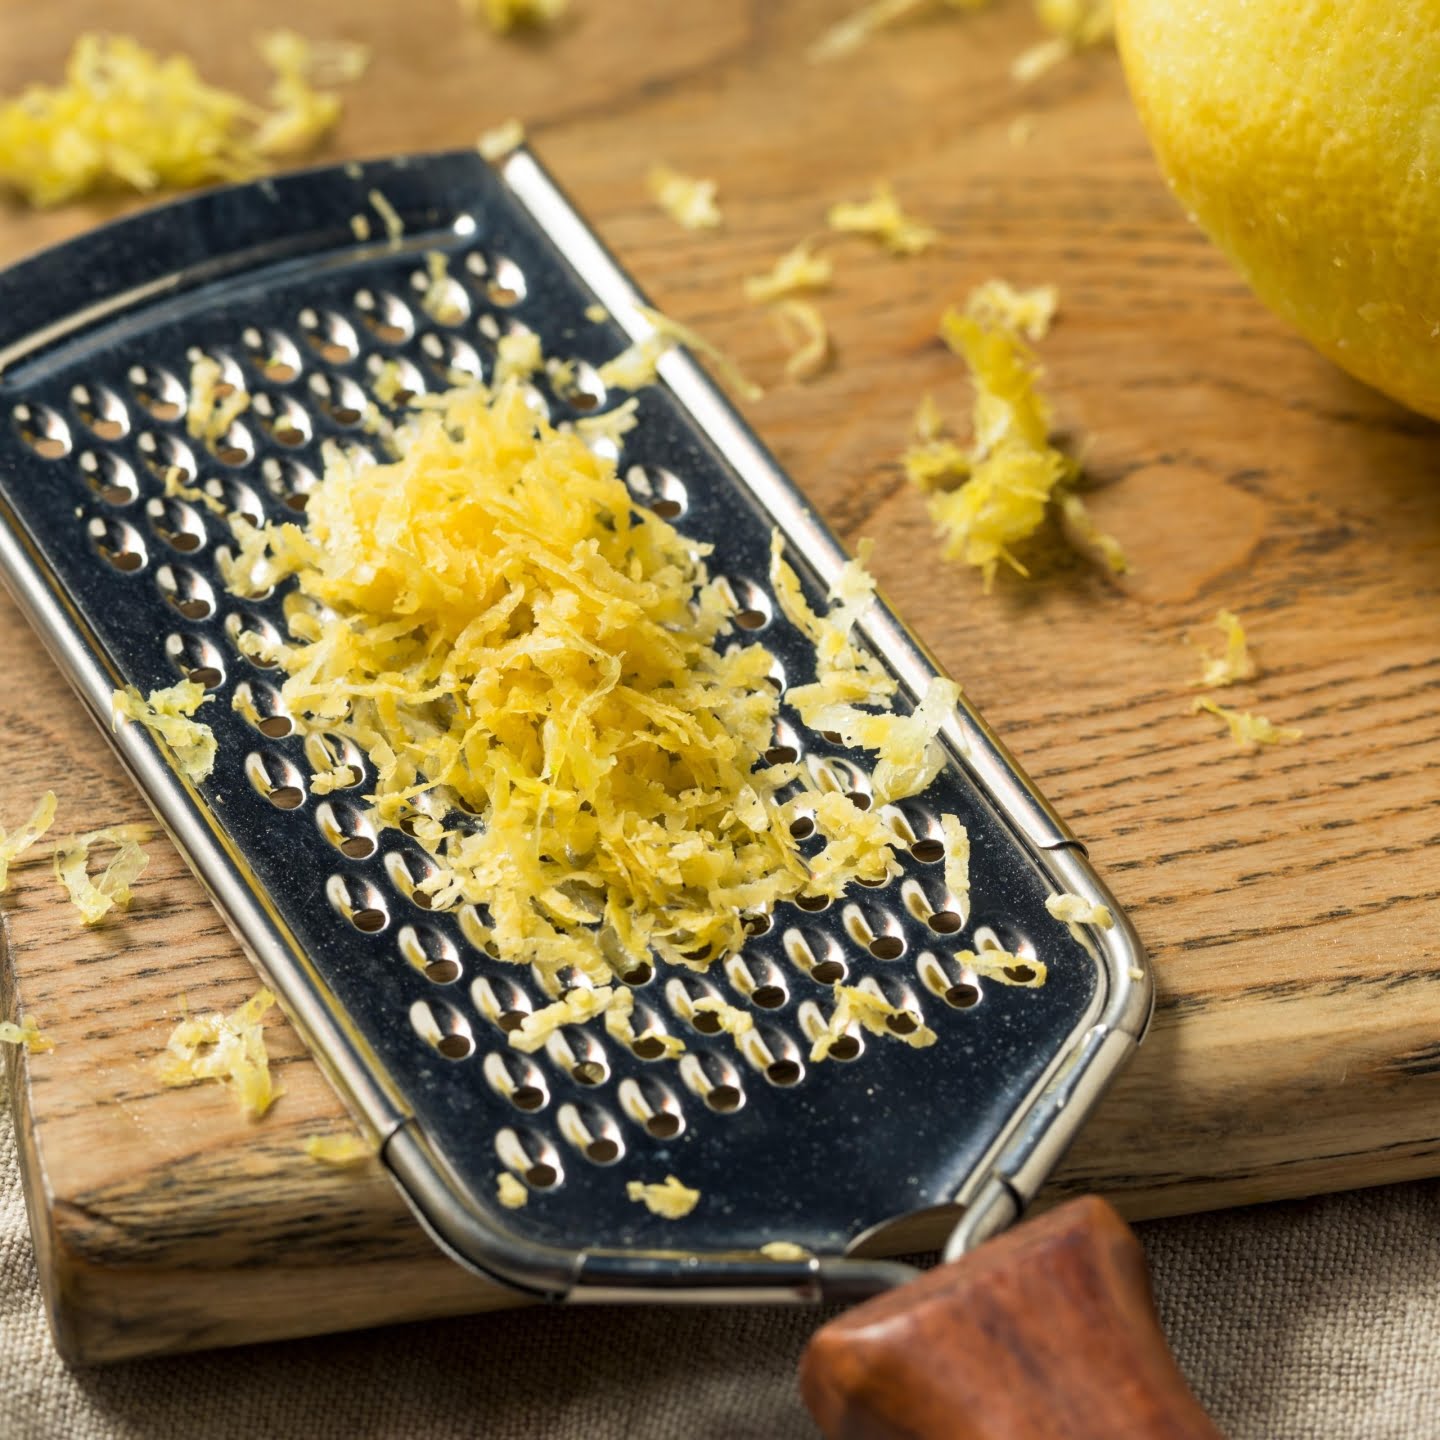 How to use lemon zest in food, desserts, and garnish